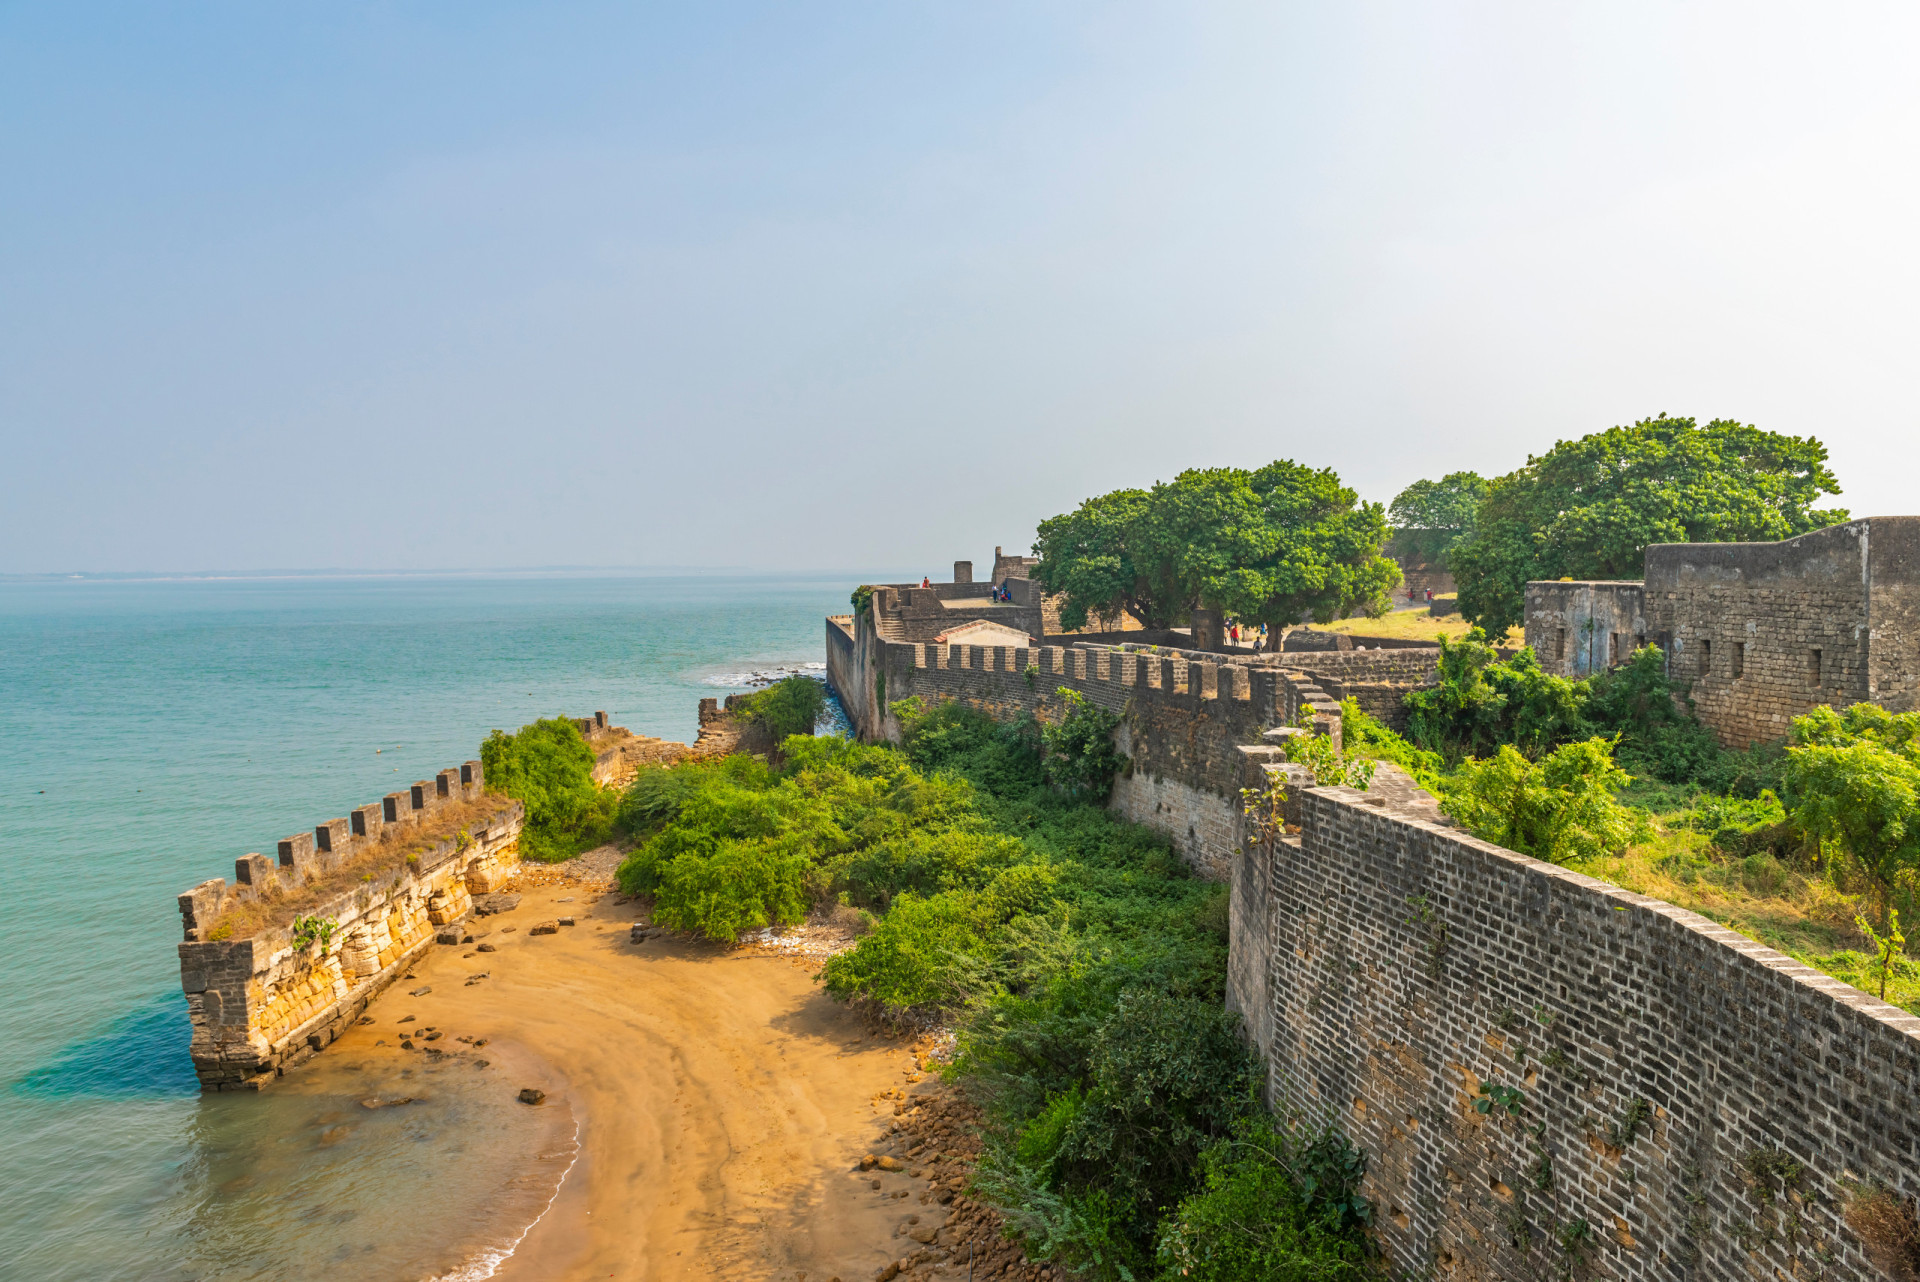 <p>Set off the southern coast of Gujarat's Kathiawar peninsula, Diu Island brims with remnants of a bygone Portuguese era, exemplified by the 16th-century Diu fortress. It stands as one of the Seven Wonders of Portuguese Origin in the World.</p><p>You may also like:<a href="https://www.starsinsider.com/n/350820?utm_source=msn.com&utm_medium=display&utm_campaign=referral_description&utm_content=689150en-nz"> Ugly celebrity divorces that will make you cringe</a></p>